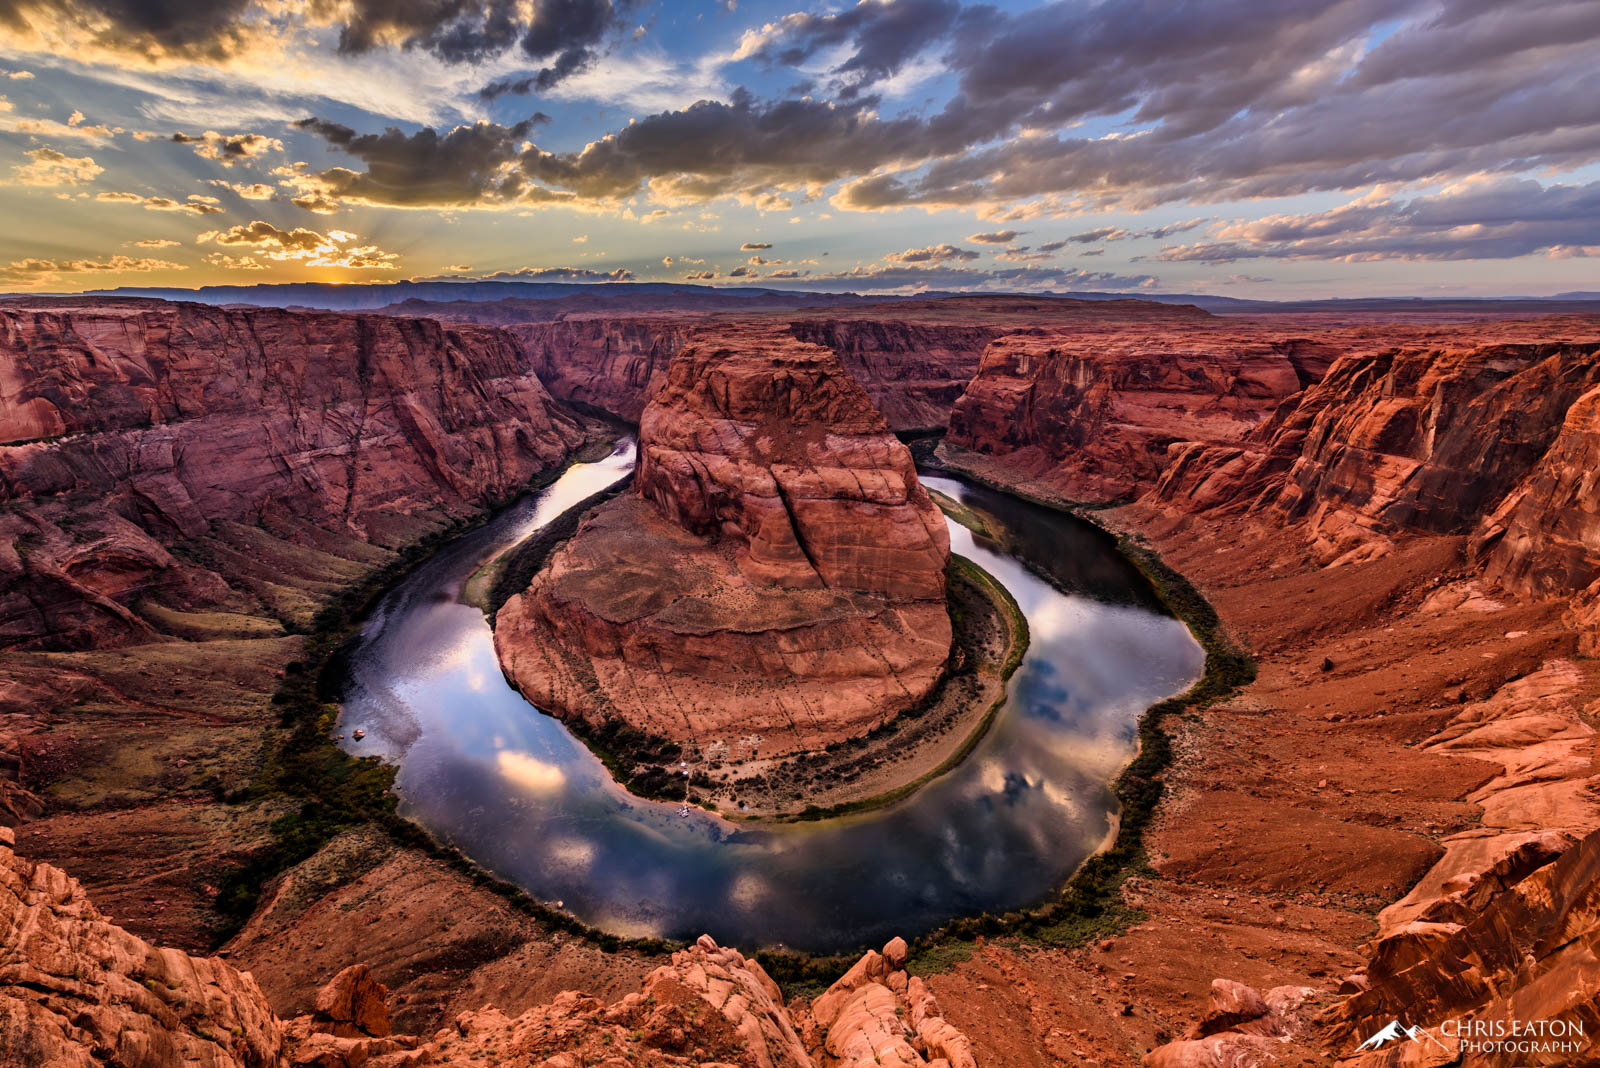 The sun has set and evening begins at Horseshoe Bend on the Colorado River in Glen Canyon National Recreation Area as clouds...